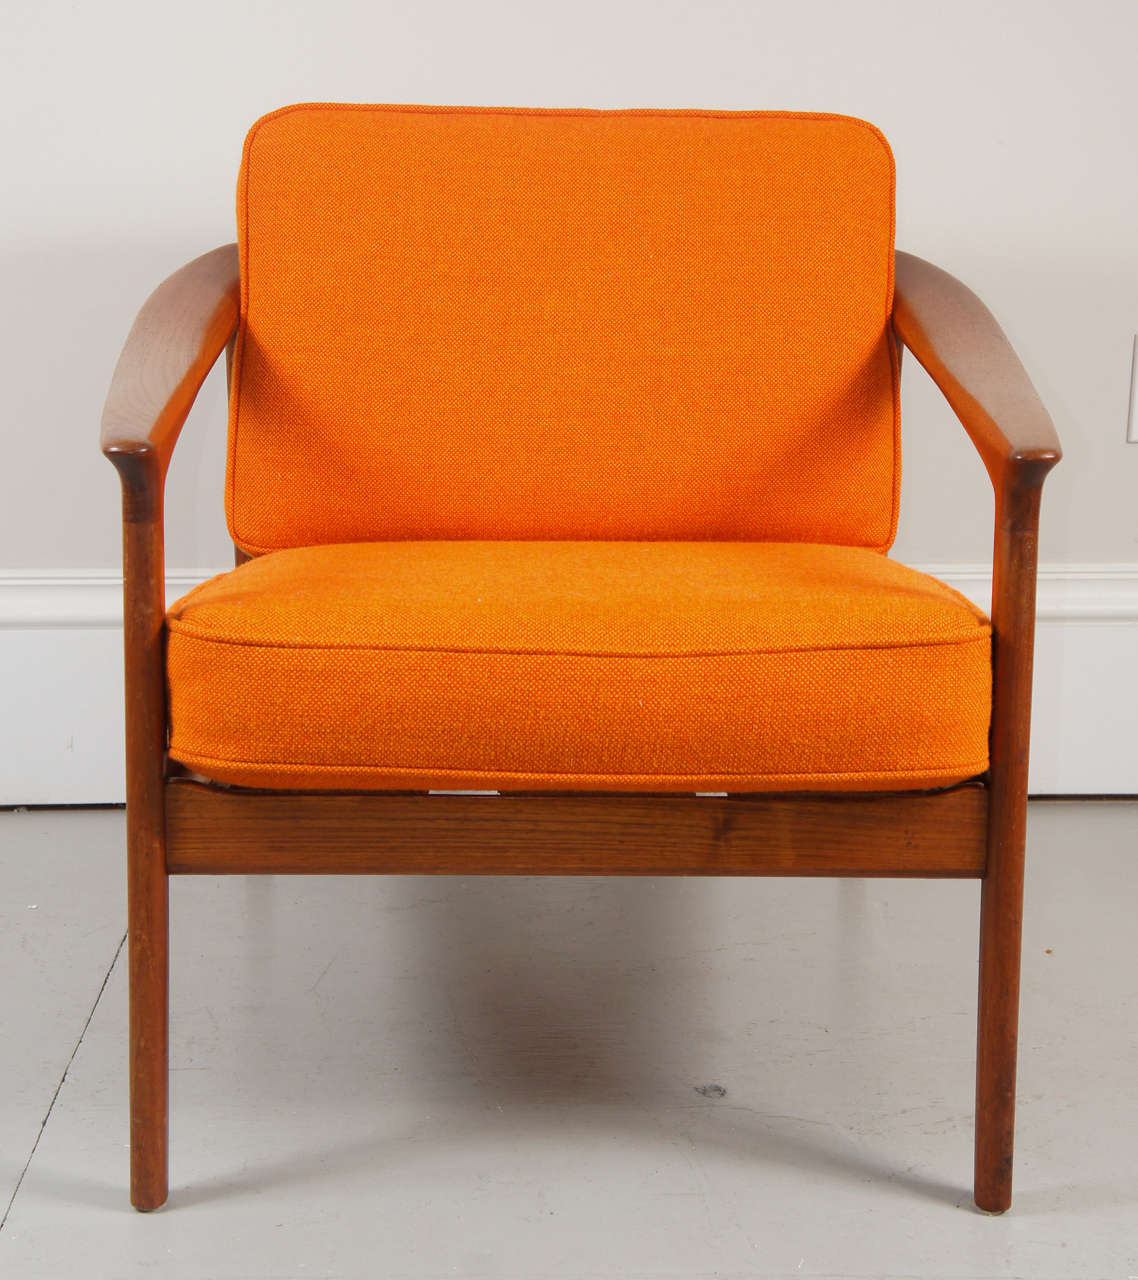 A very nice lounge chair designed by Folke Ohlsson for Dux. The upholstery is in very good condition.